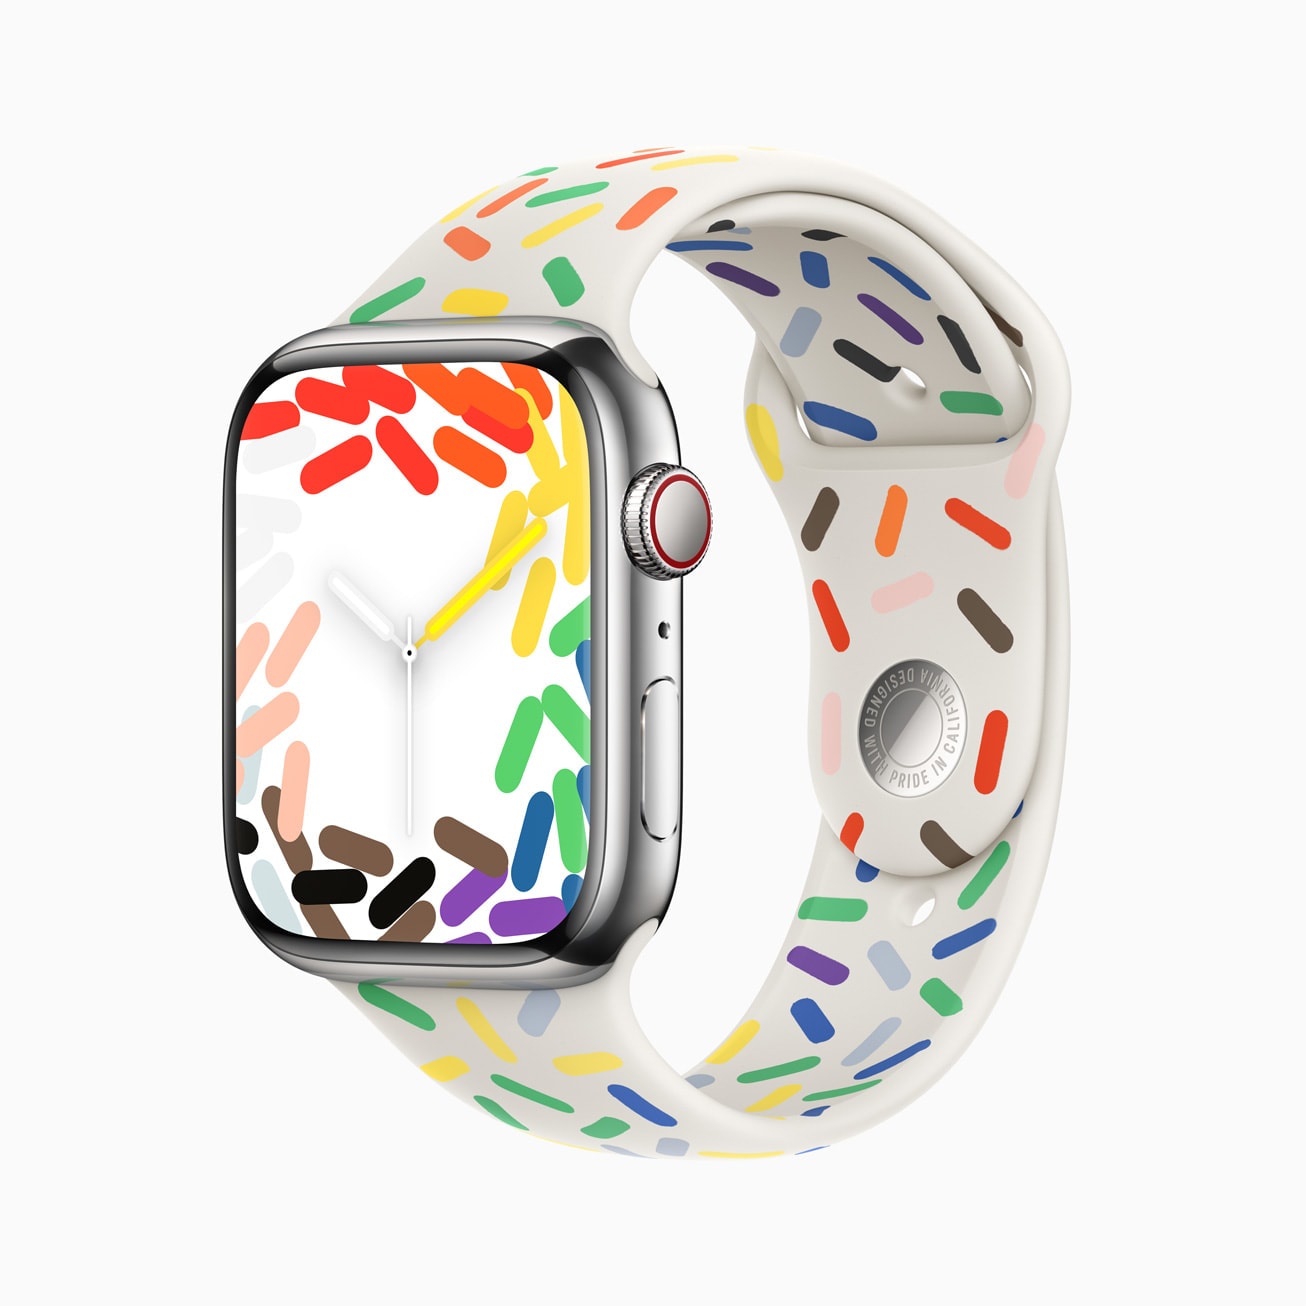 Apple said the LGBTQ+ community's strength and beauty inspired this year's Apple Watch Pride Edition.